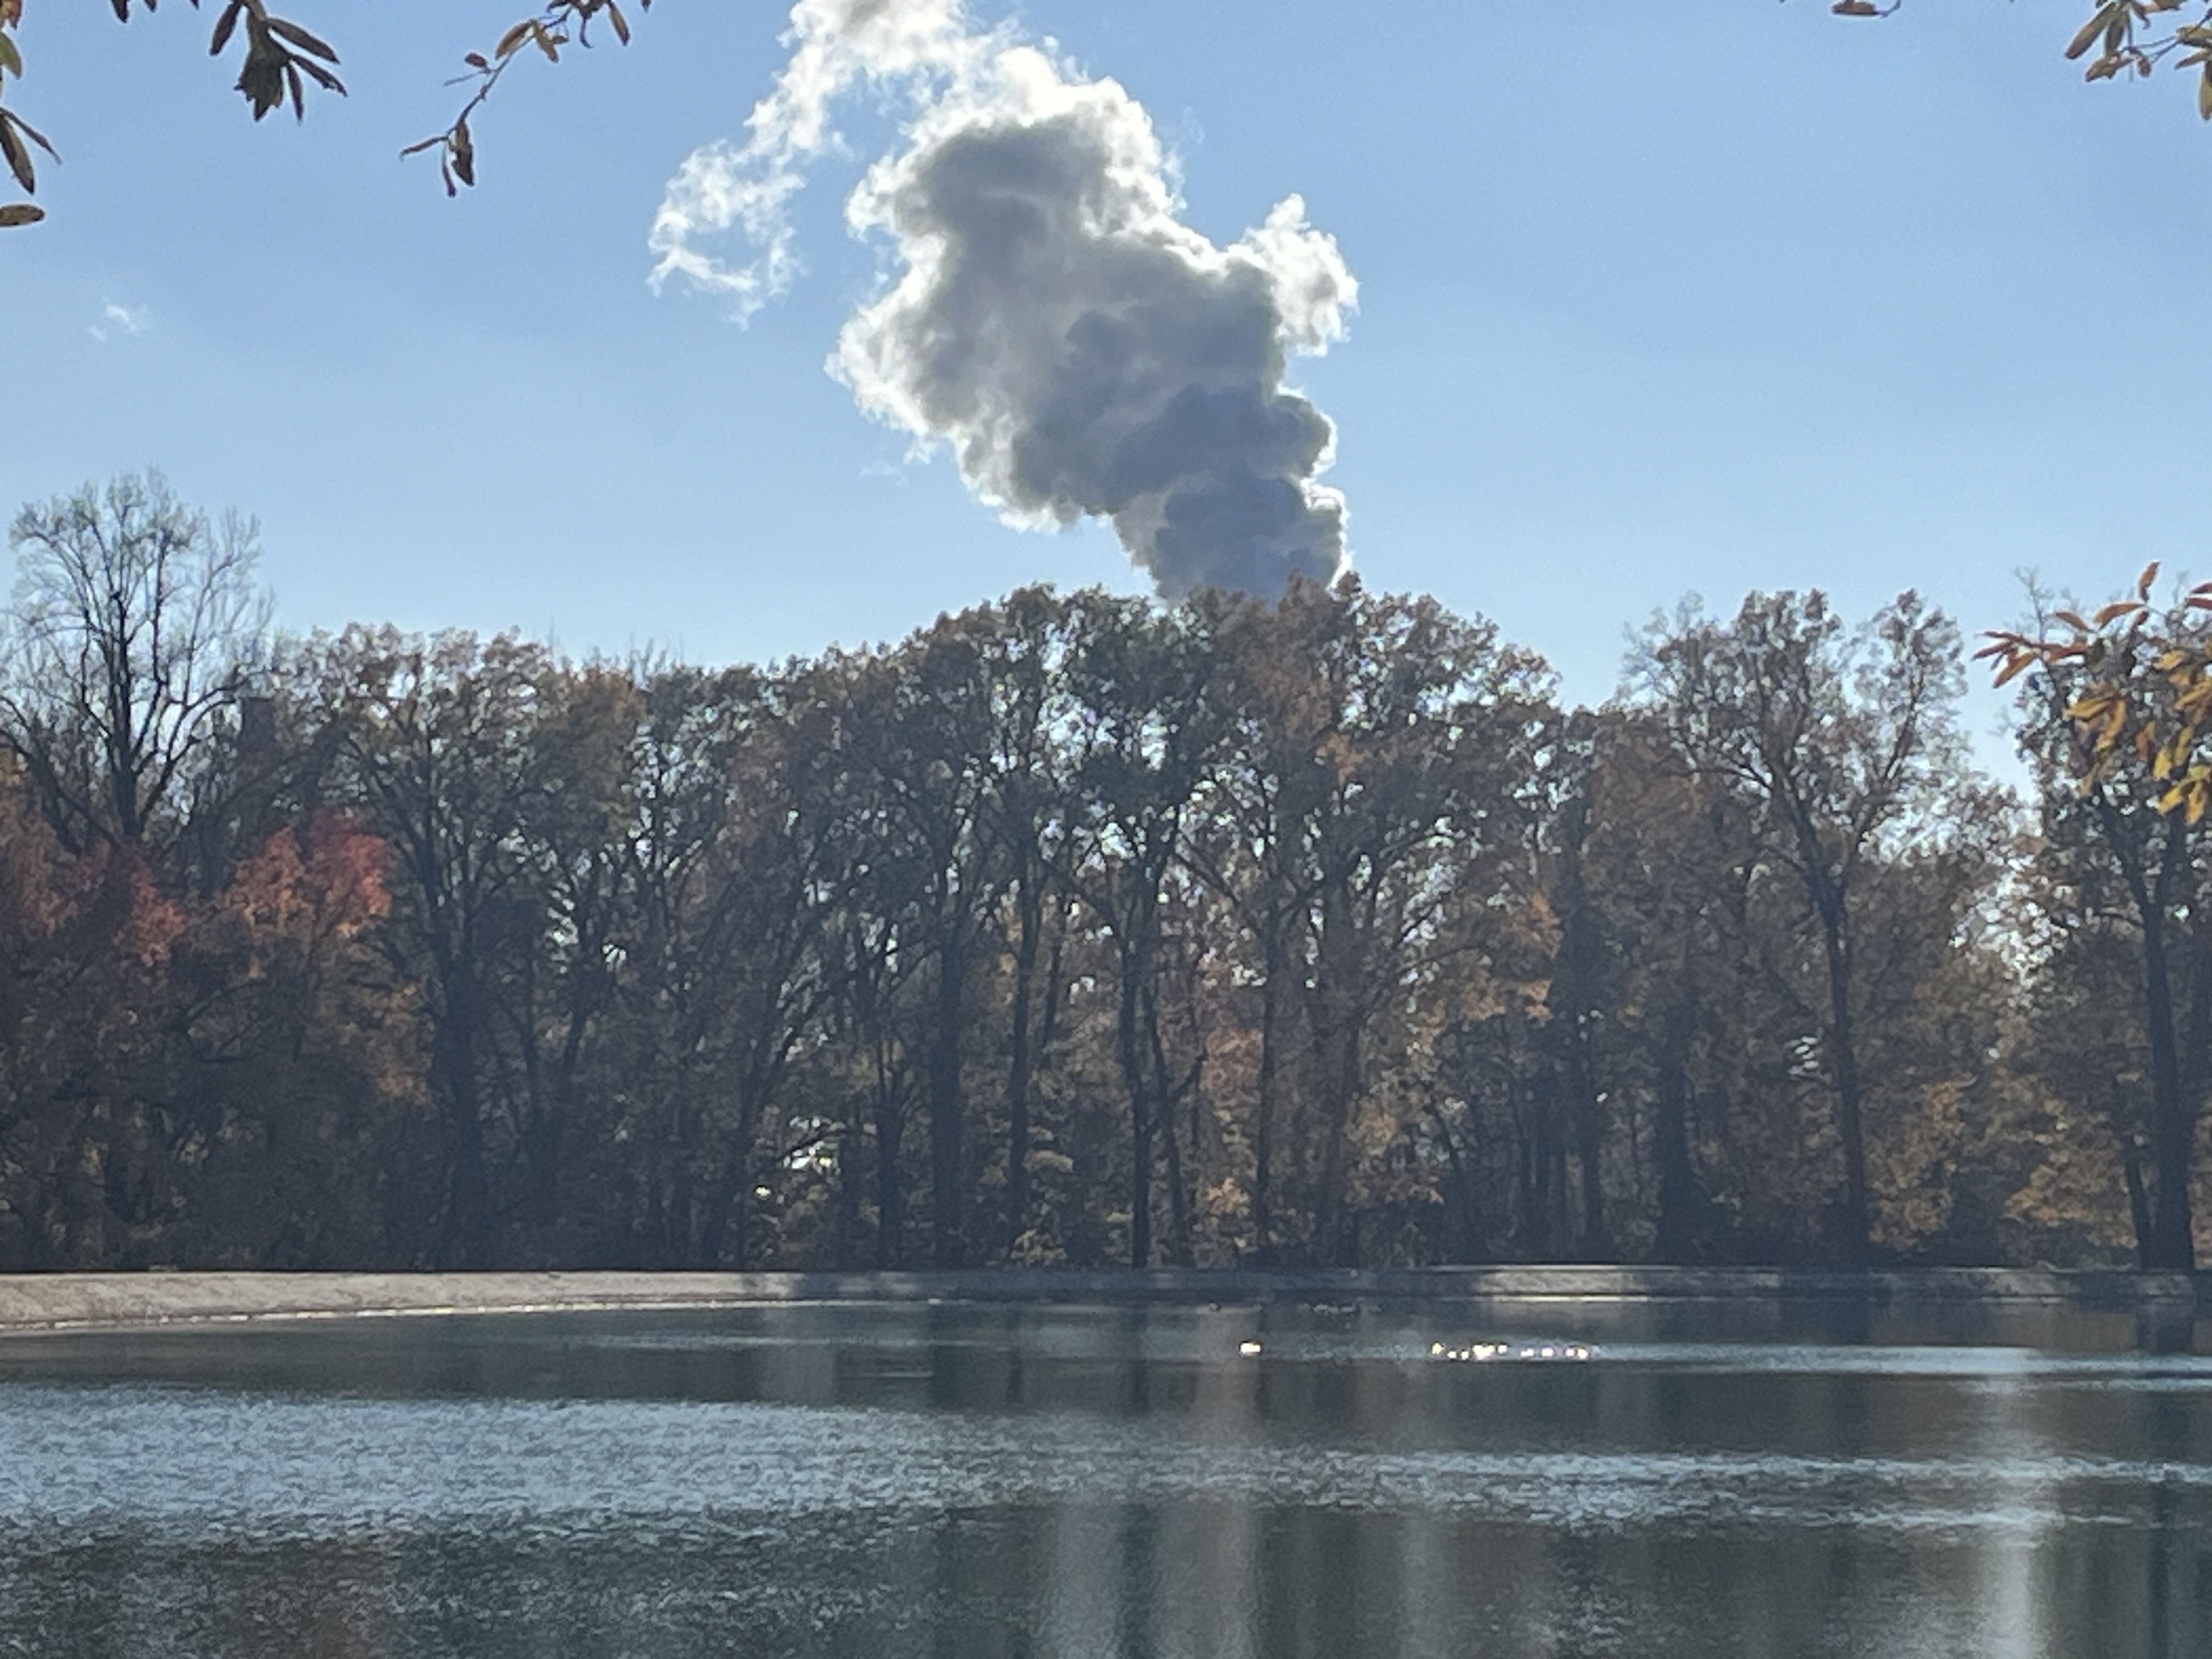 A smoke plume billows behind a row of trees that line a lake